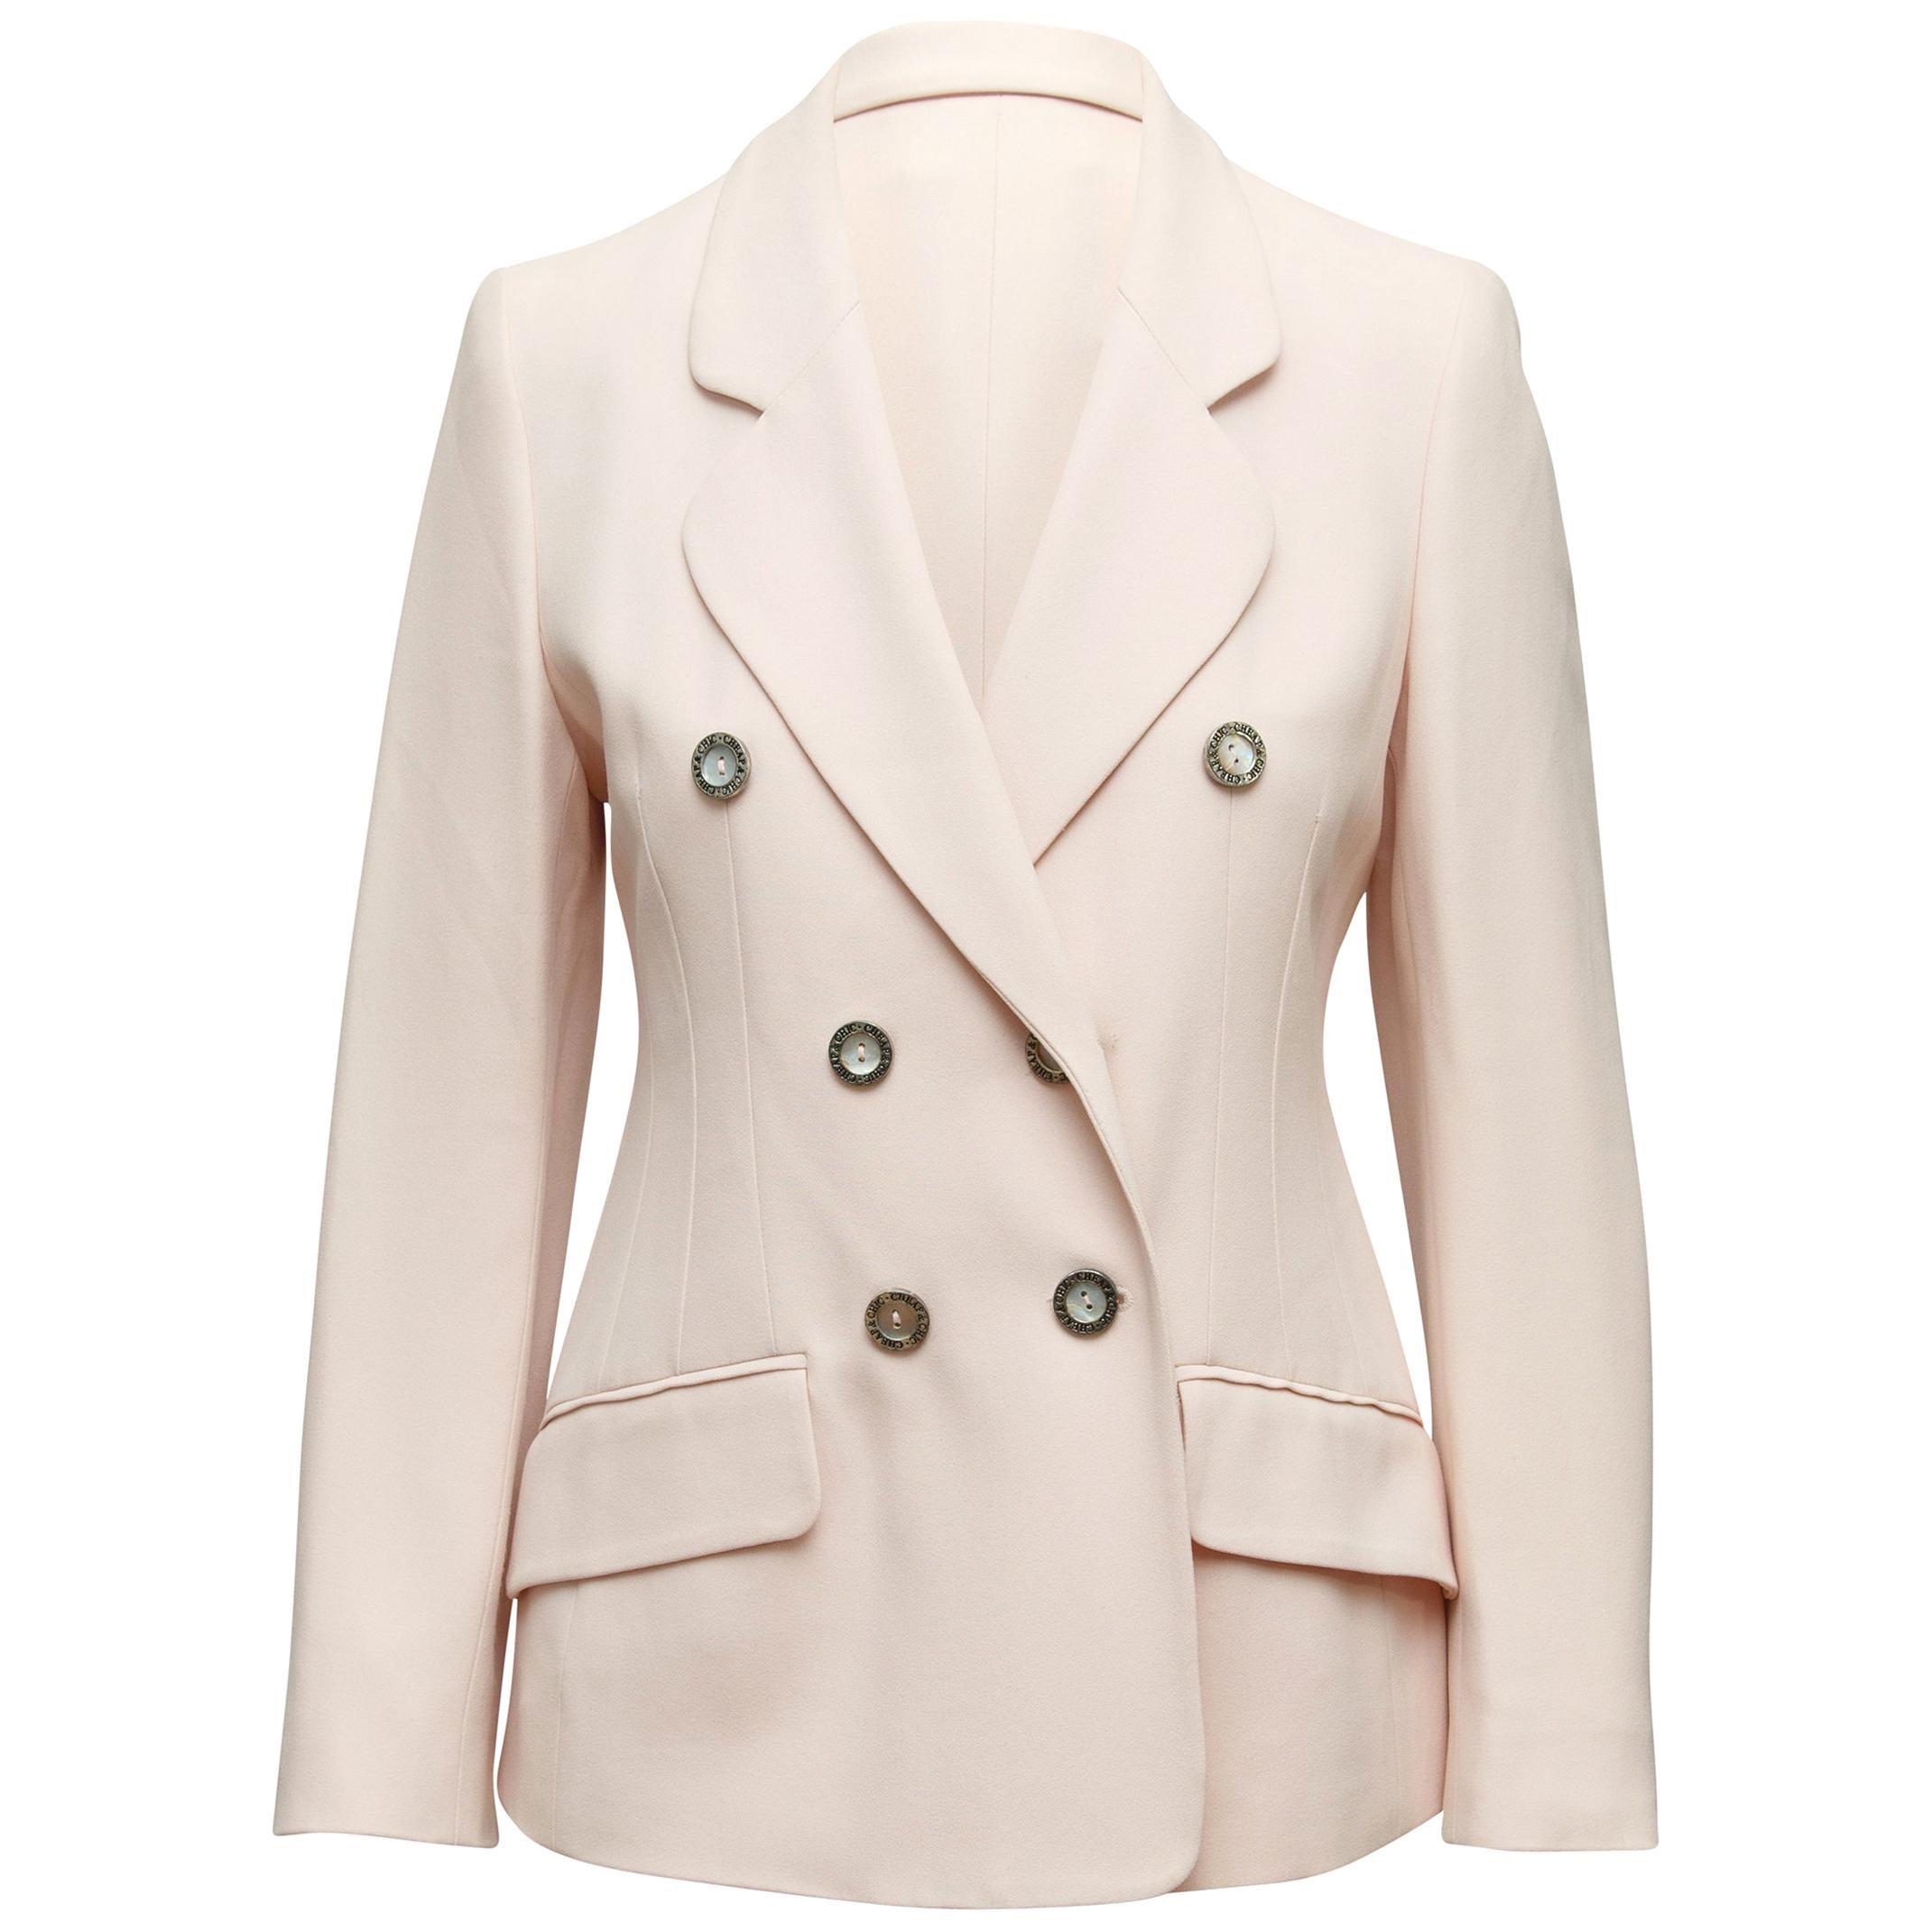 Cheap and Chico By Moschino Light Pink Blazer